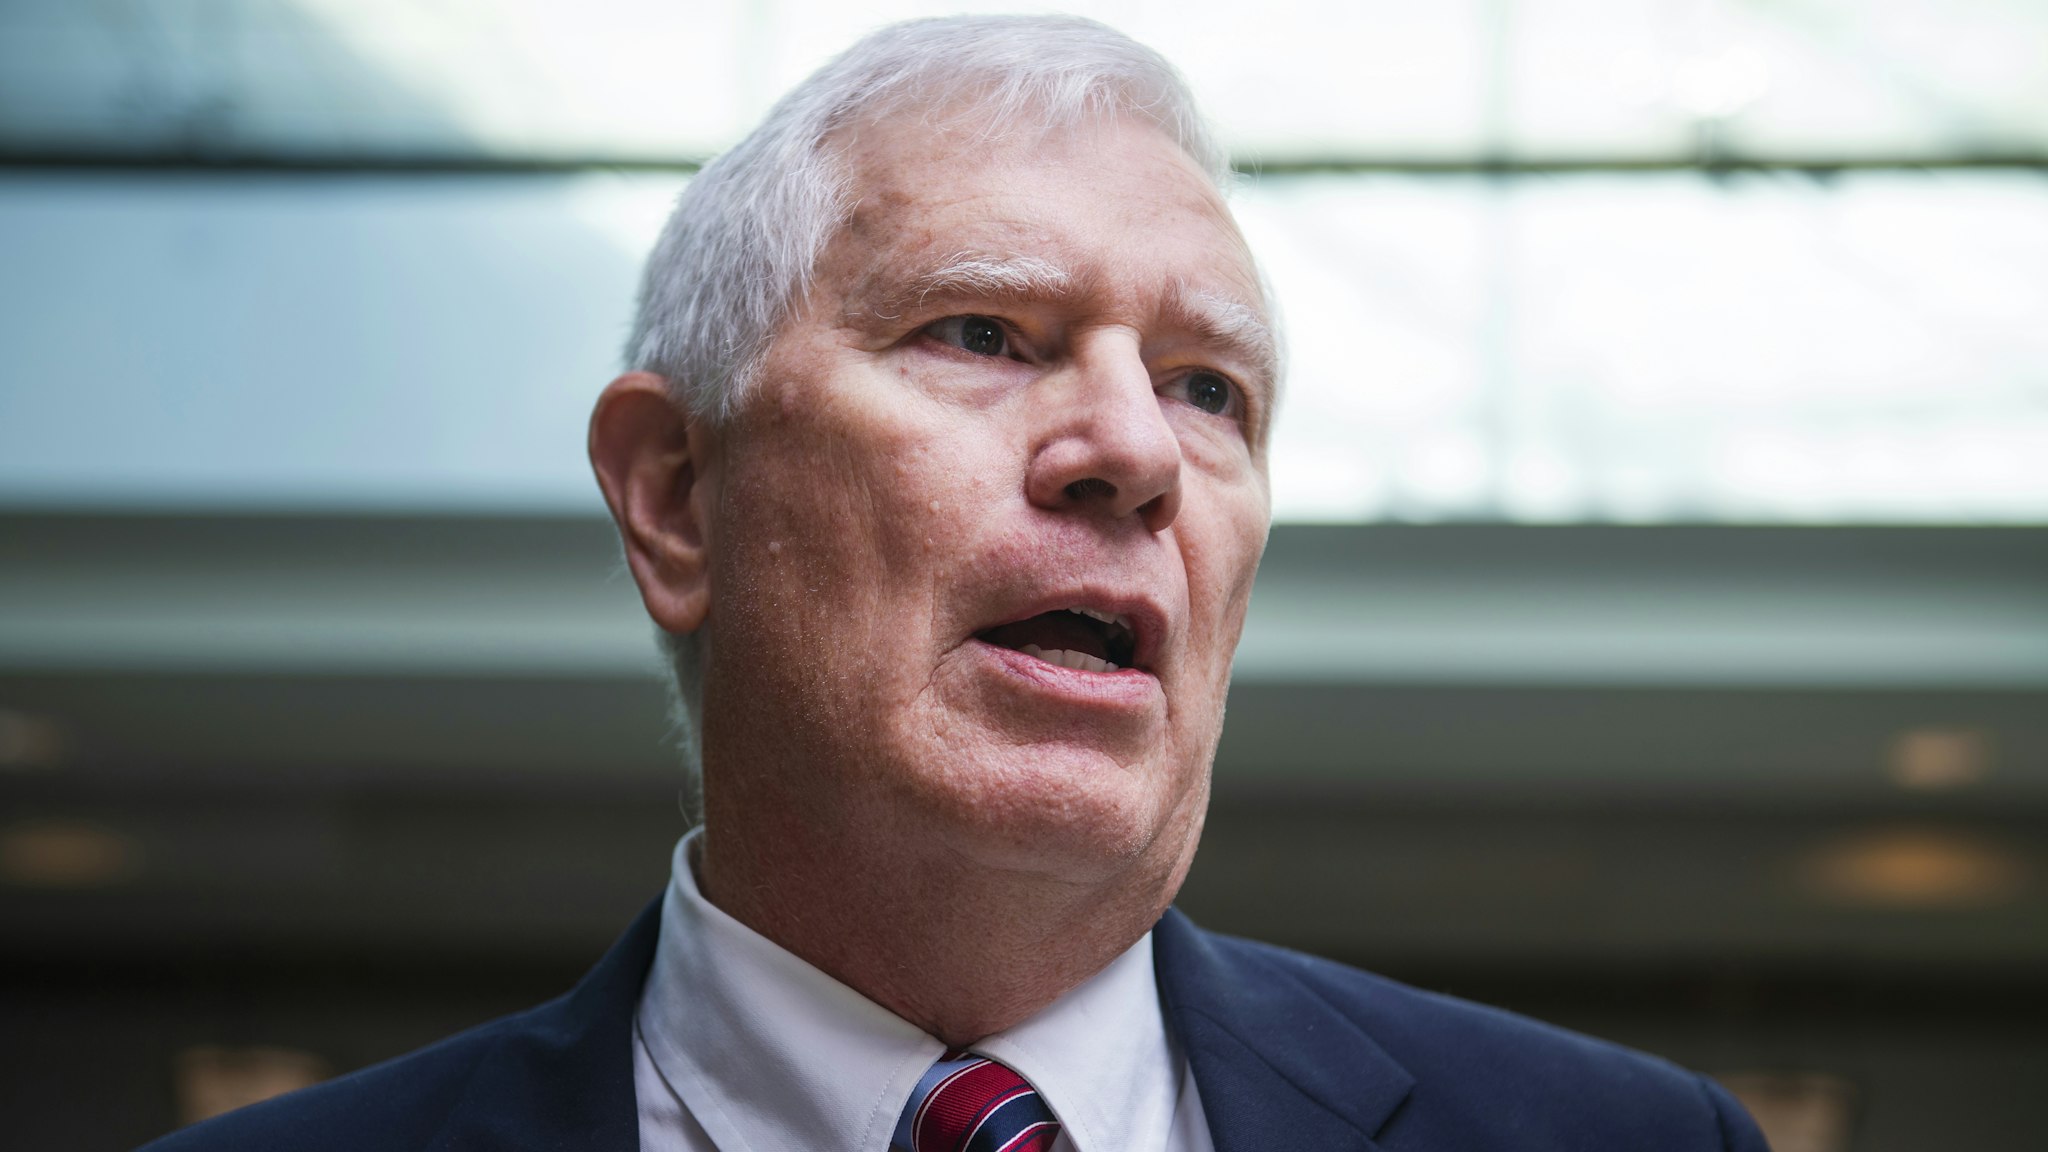 UNITED STATES - OCTOBER 23: Rep. Mo Brooks, R-Ala., talks with reporters in the Capitol Visitor Center outside the Laura Cooper, deputy assistant secretary of defense, deposition related to the House's impeachment inquiry on Wednesday, October 23, 2019. The Republican members were calling for access to the deposition.